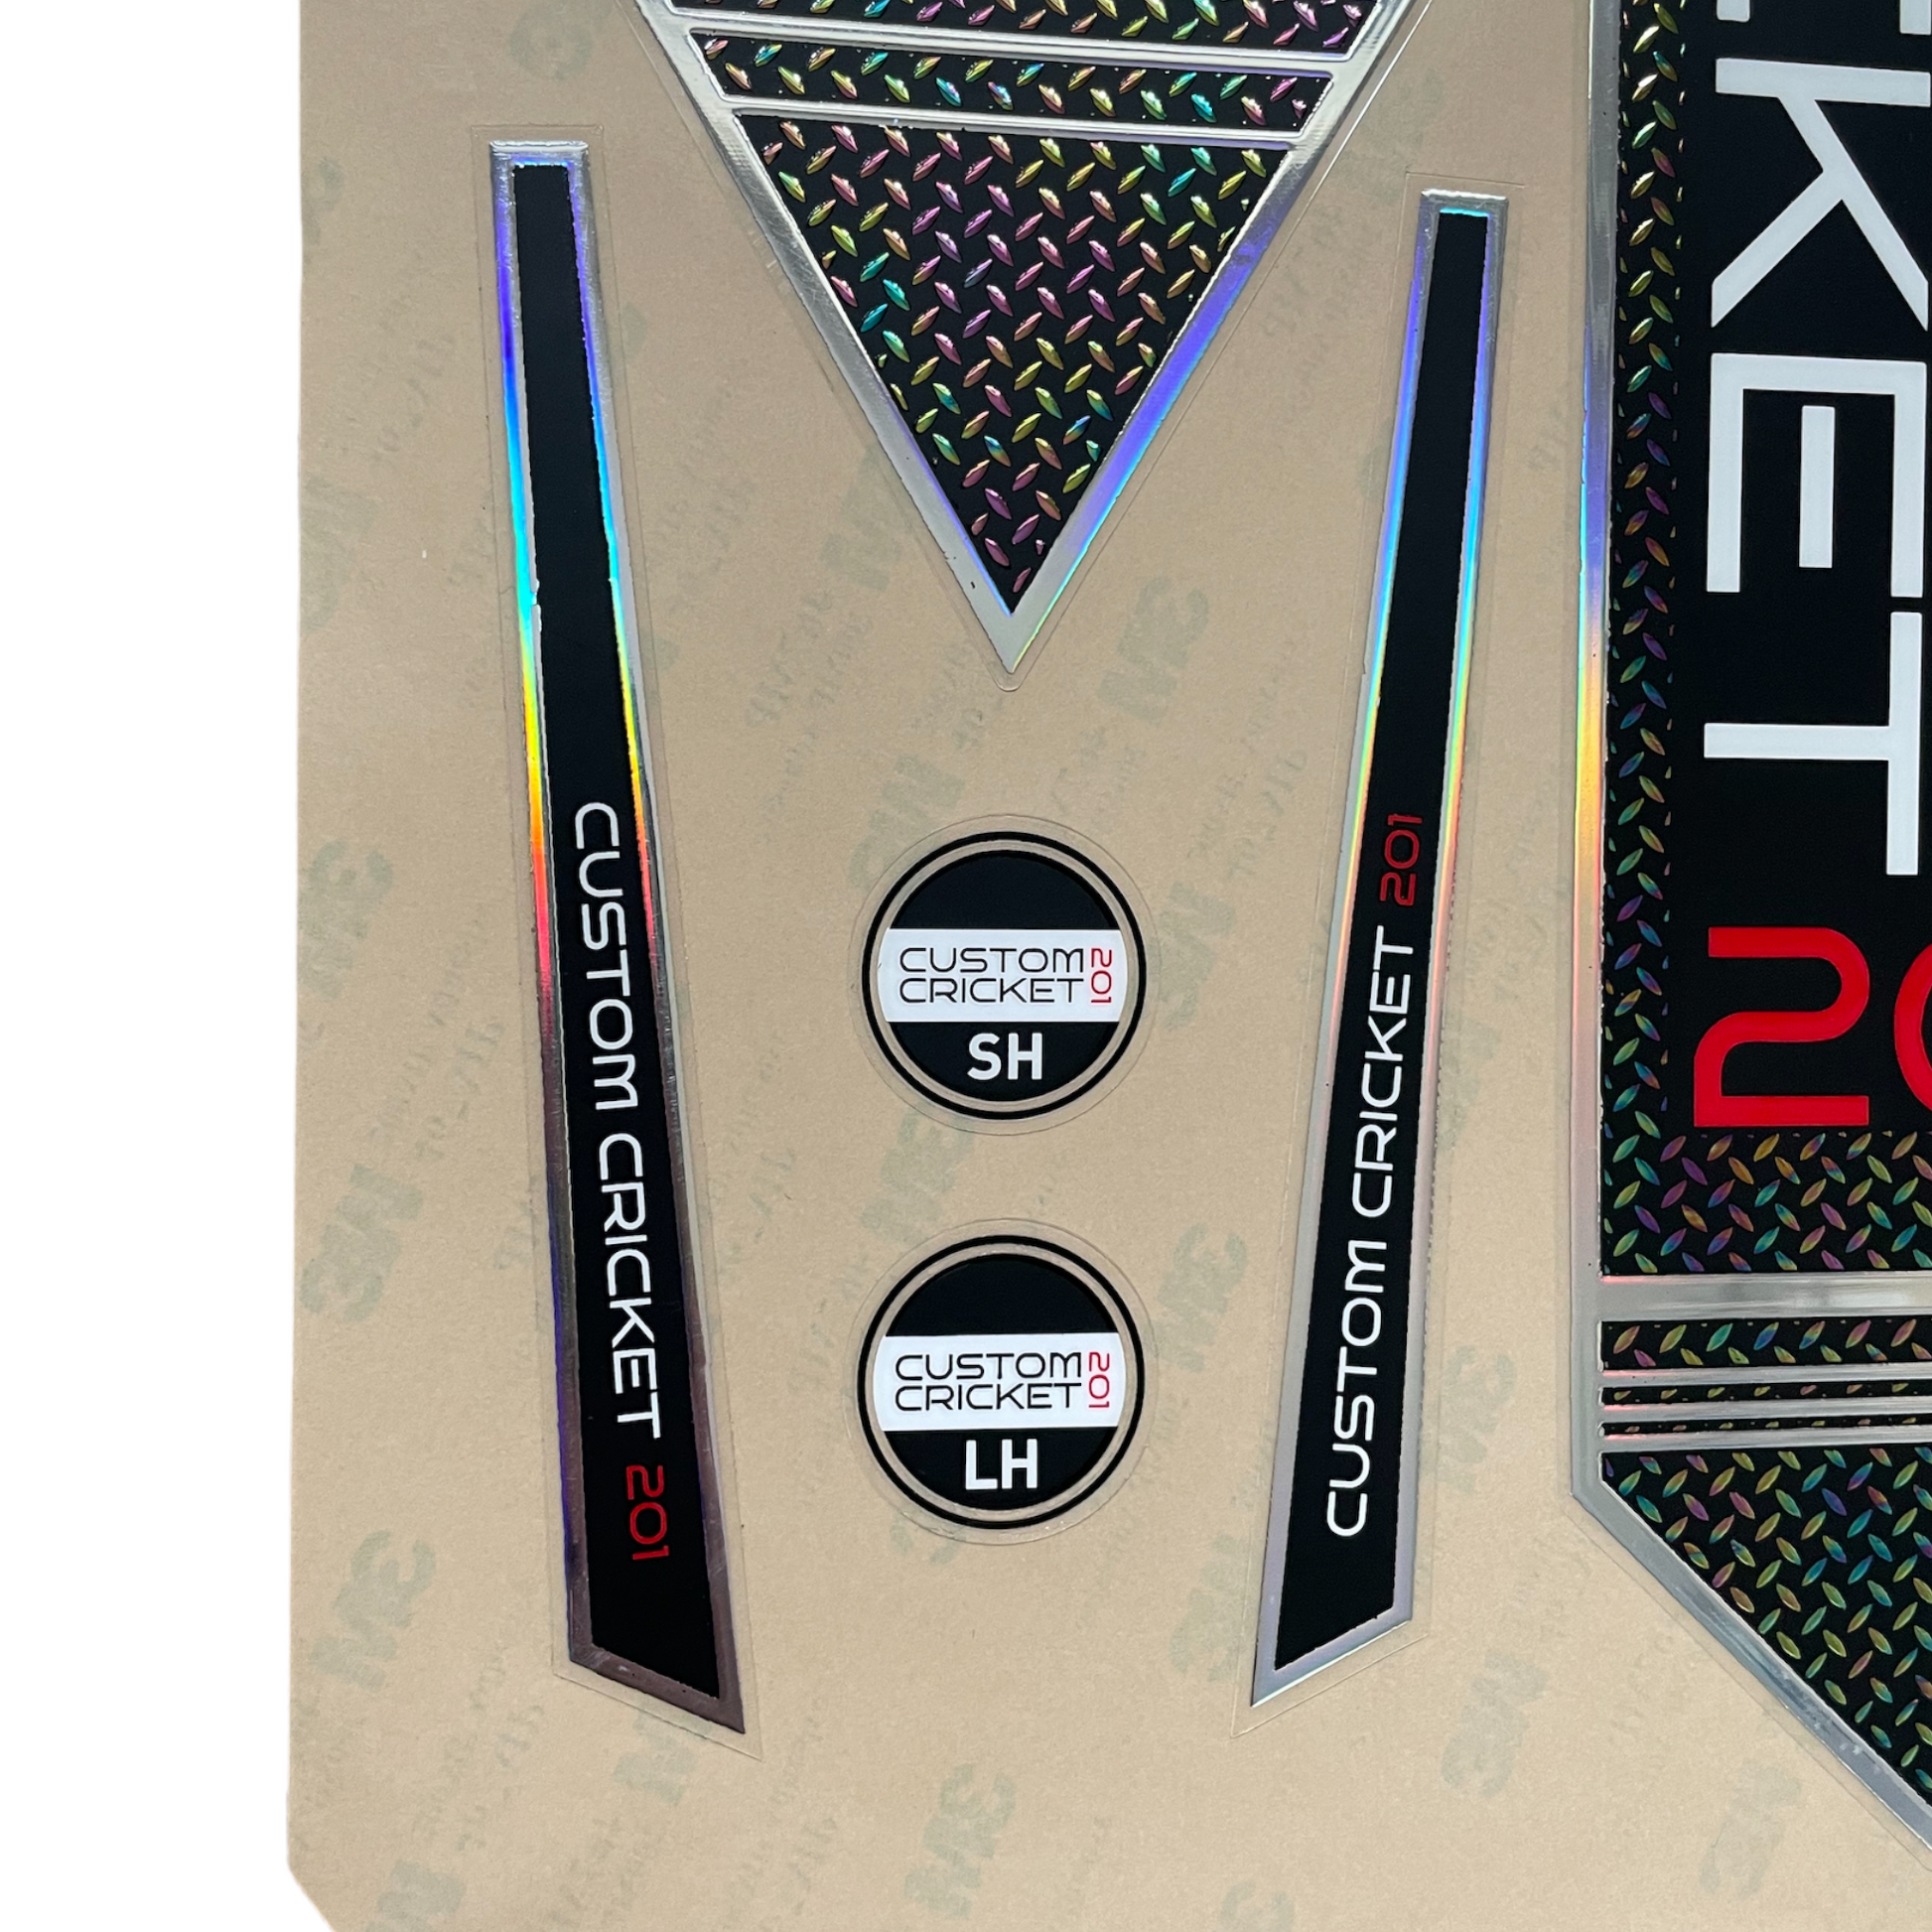 CC201 Custom Cricket 201 Bat stickers fully embossed holographic 3M Cricket Bat stickers Free post and packaging Cricket shop Cricket store Brighton and Hove east sussex